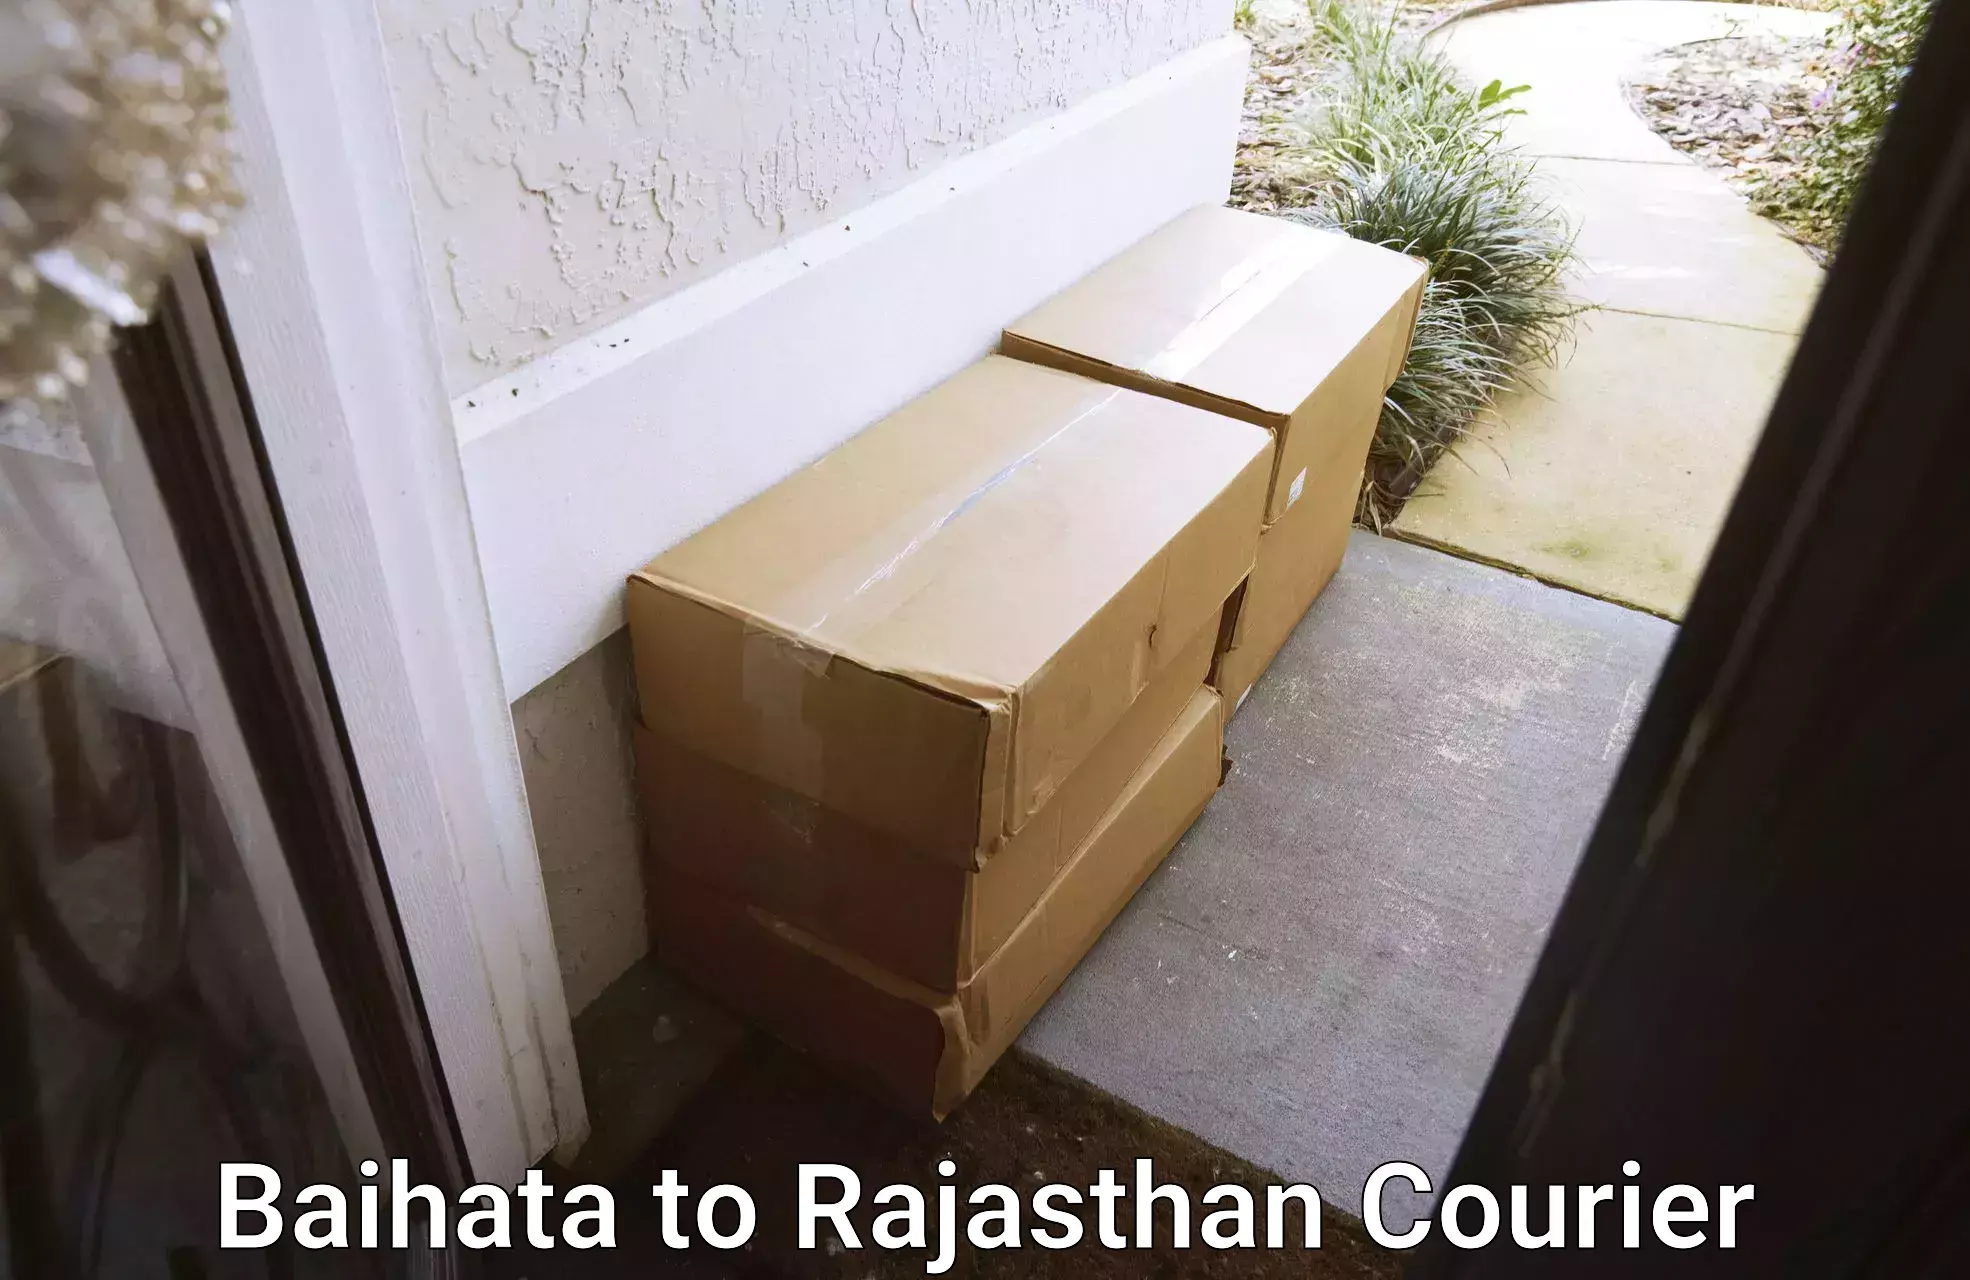 End-to-end delivery Baihata to Rajasthan